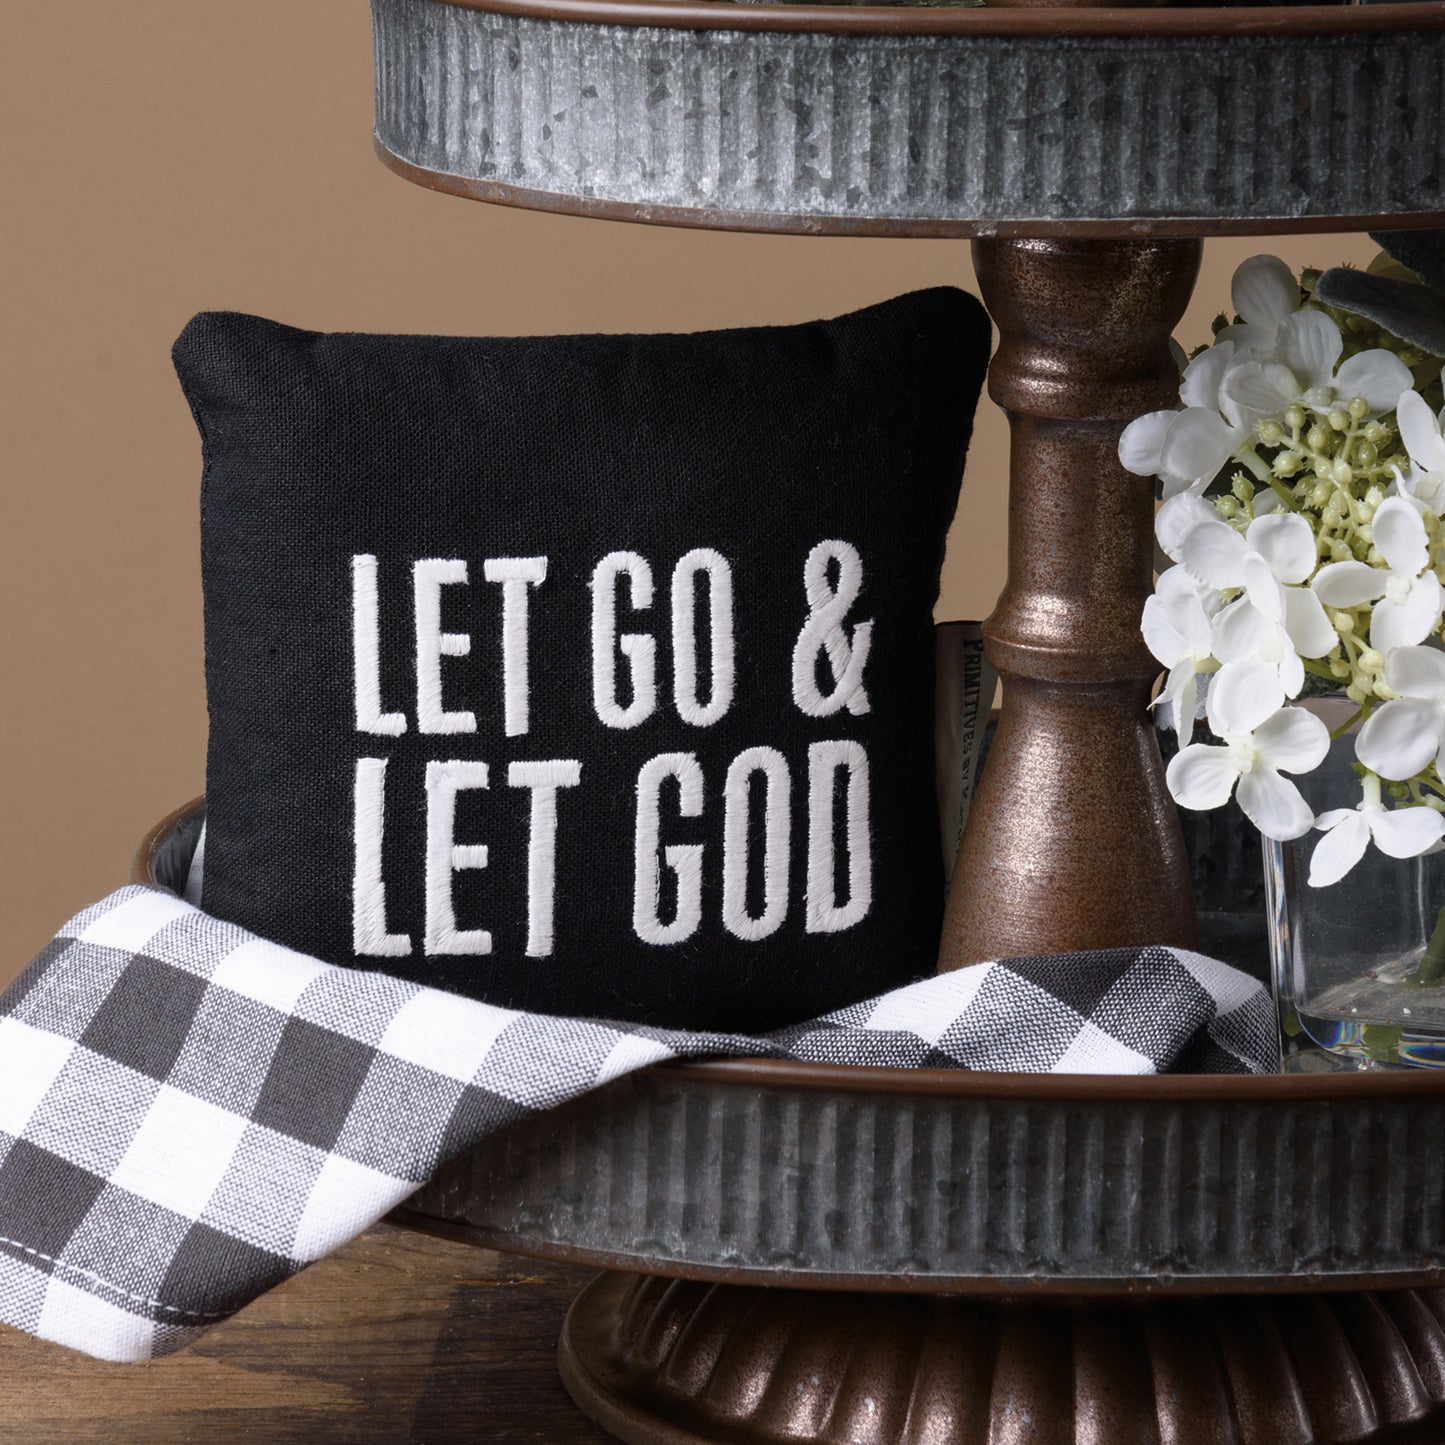 a small black pillow that reads Let Go & Let God sits on the bottom tray of a metal tiered tray with a gray and white checked towel under the pillow and a small white flower on the right